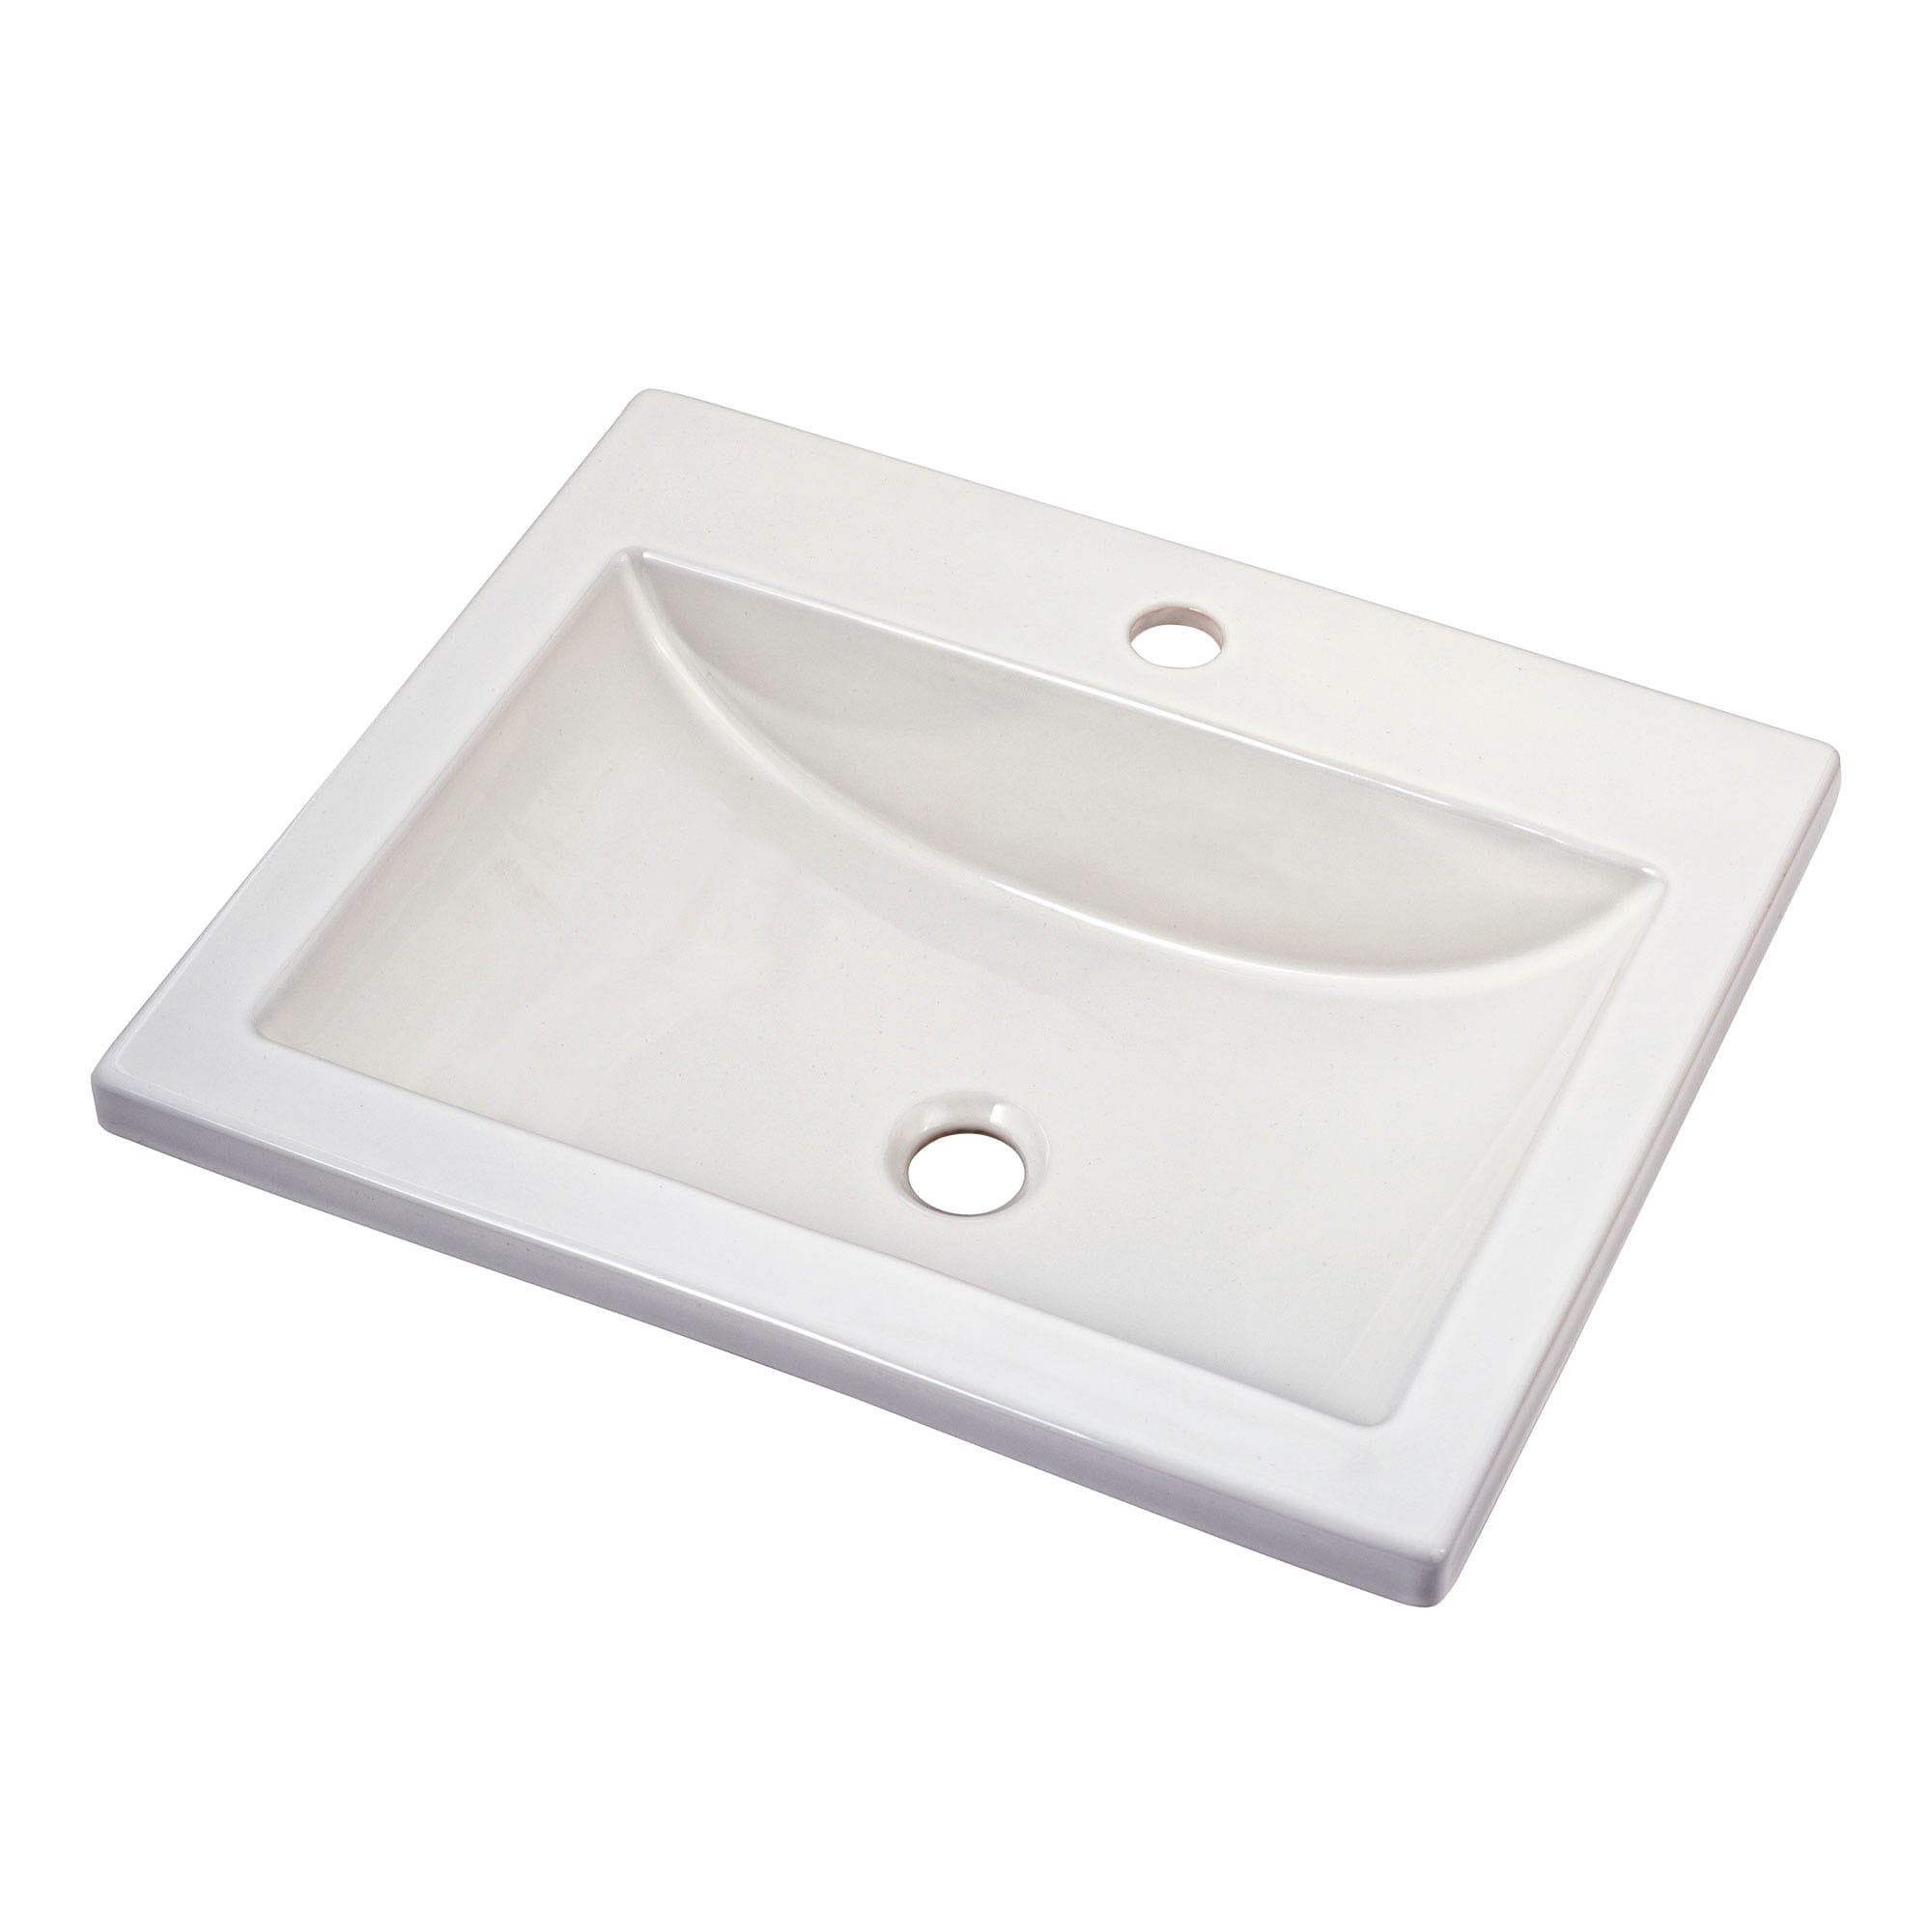 Studio Drop In Sink With Center Hole Only WHITE